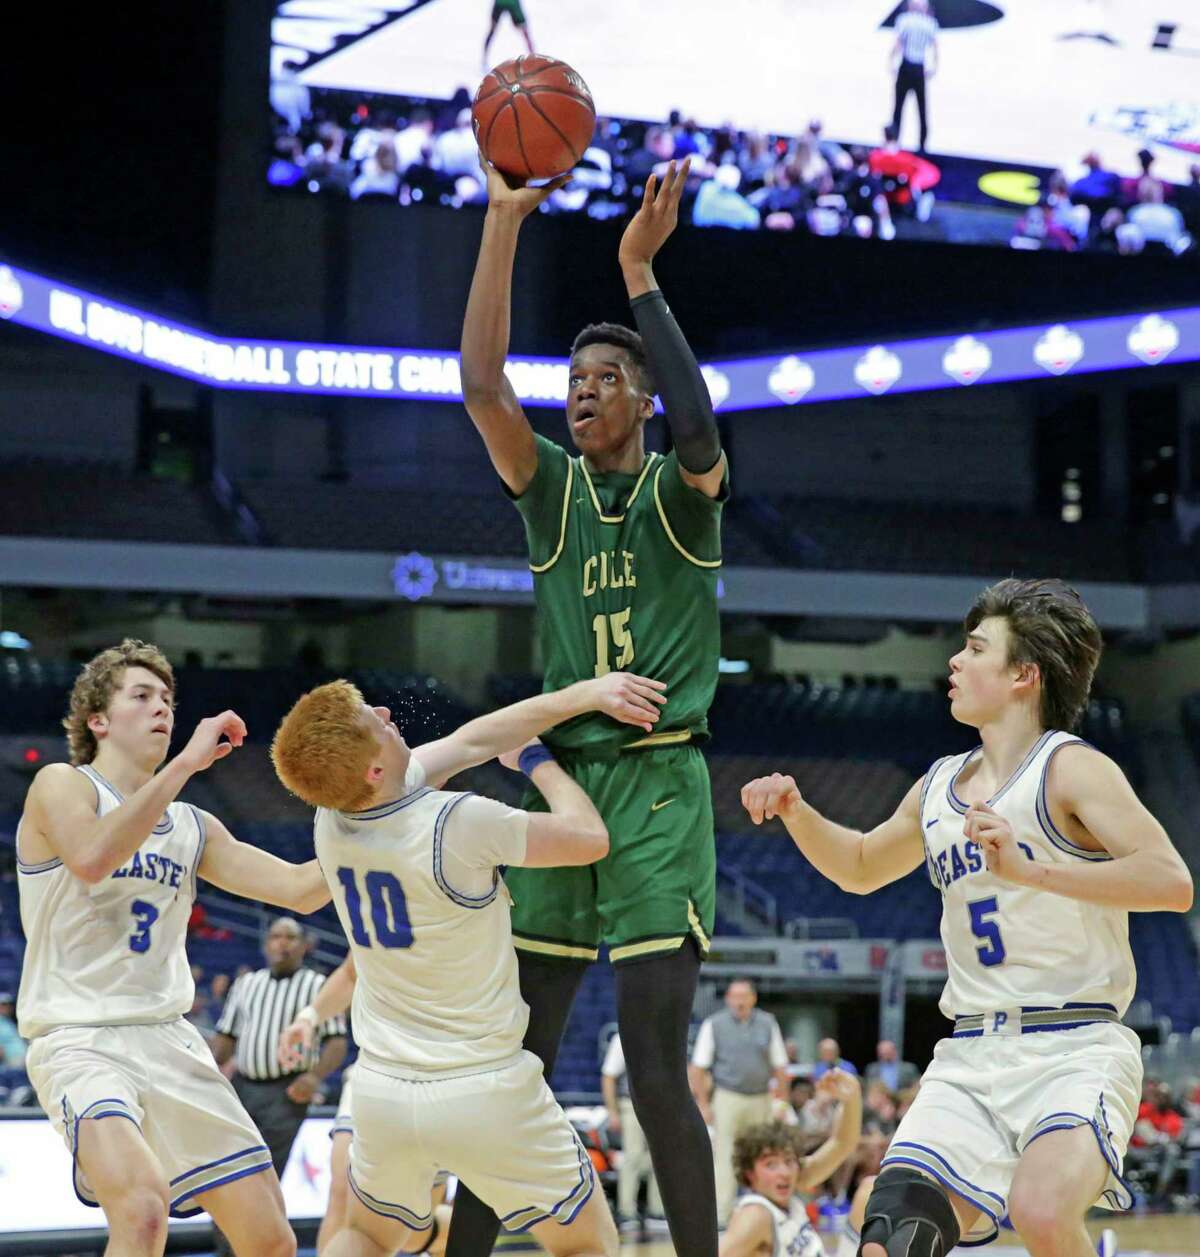 Vince Iwuchukwu gets off a jumper in a crowd during the class 3A state semifinal boys basketball game between Cole and Peaster at the Alamodome on Feb. 12, 2020.